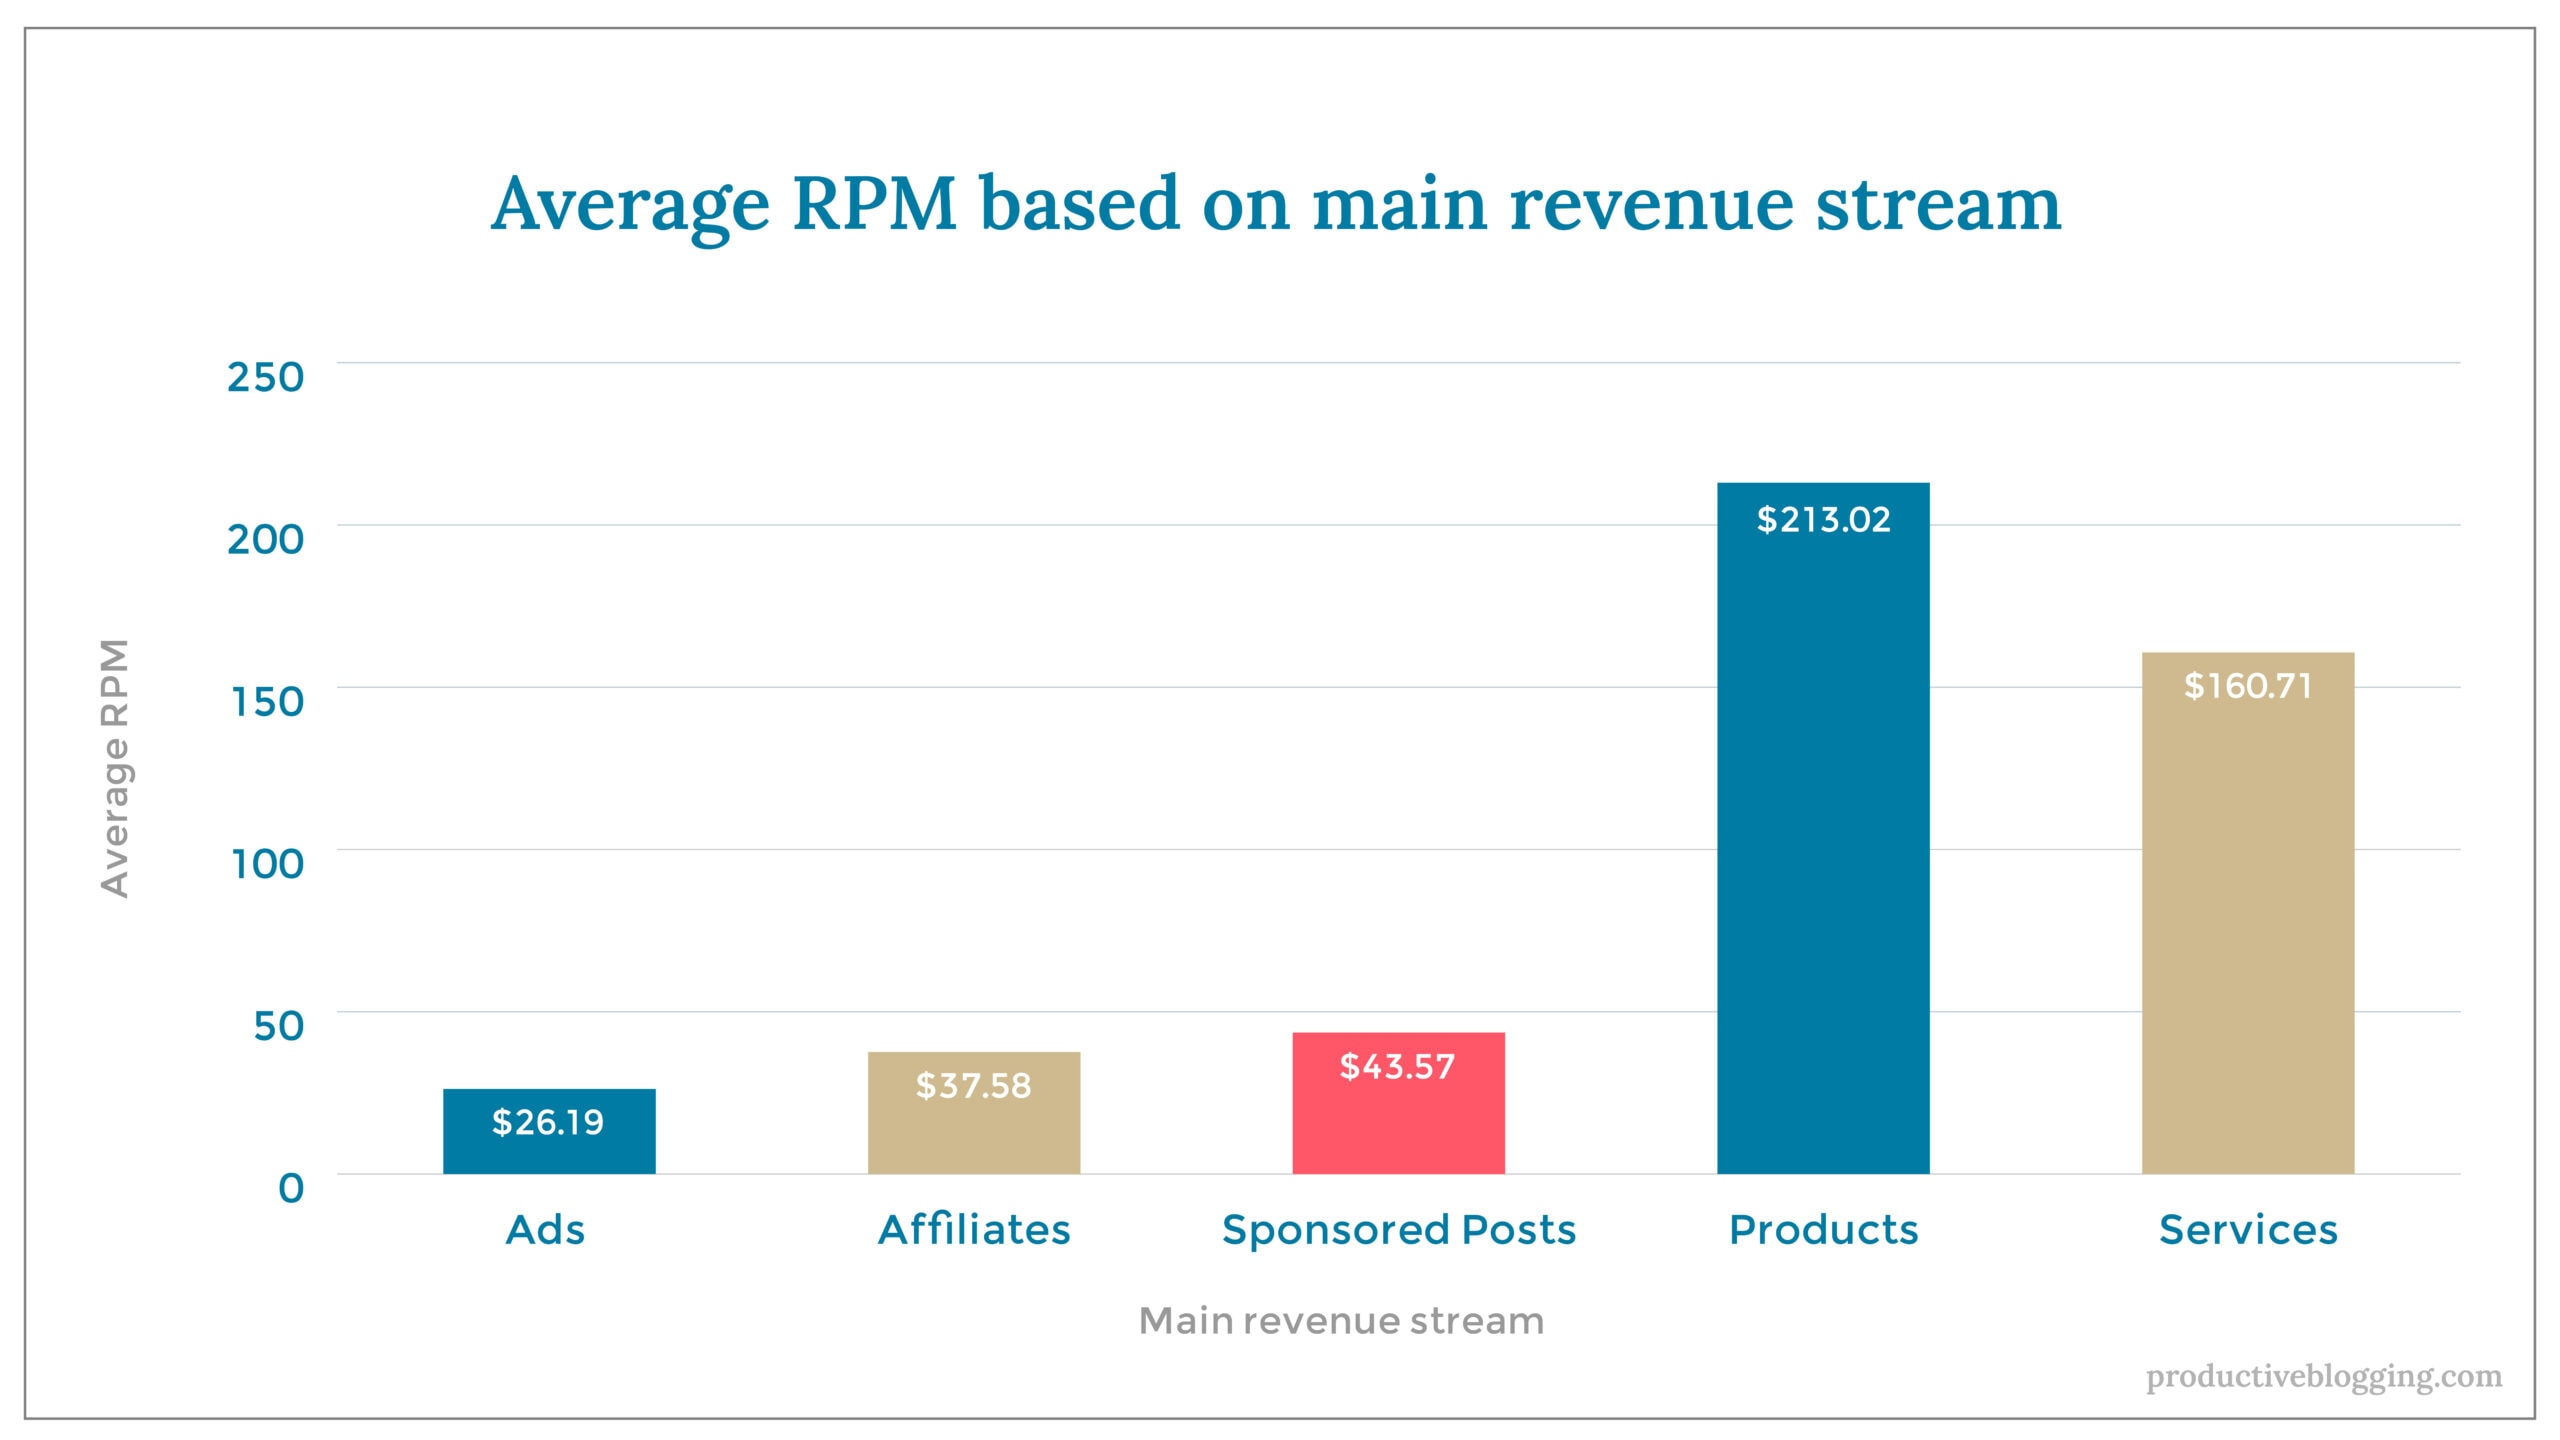 Average RPM based on main revenue streamX axis: Main revenue streamY axis: Average RPMAds 			$26.19Affiliates		$37.58Sponsored Posts	$43.57Products		$213.02Services		$160.71